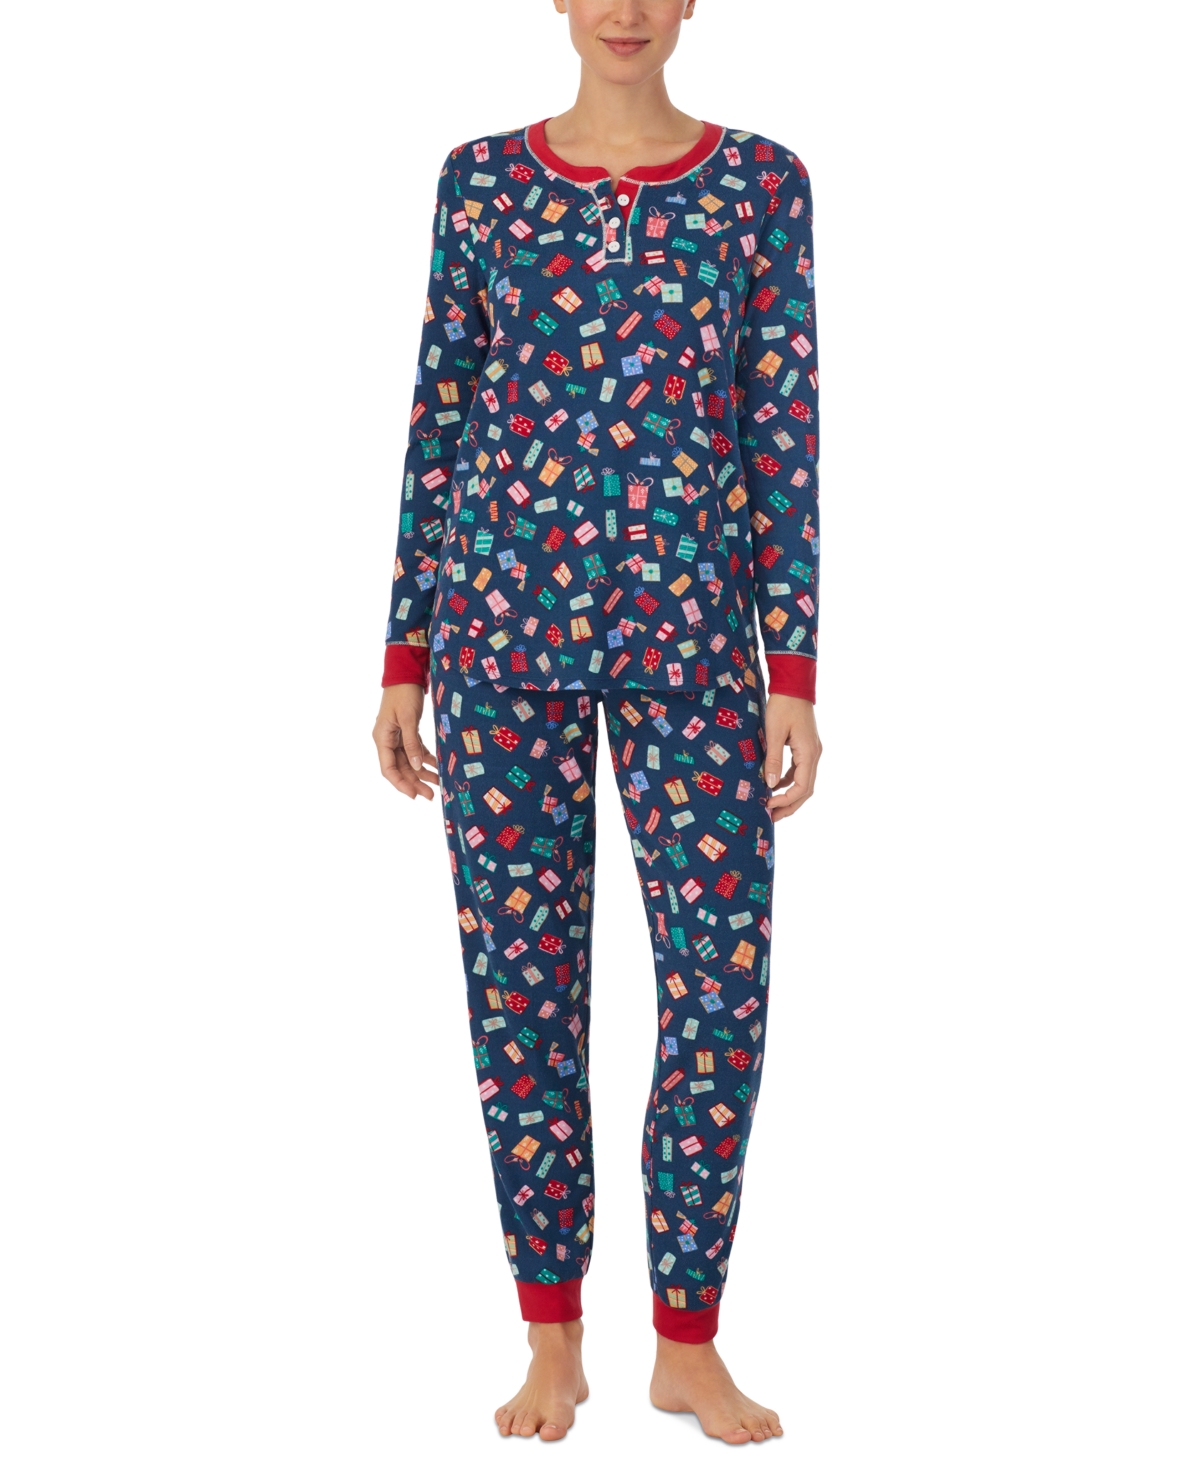 Cuddl Duds Women's 2-pc. Brushed Sweater Knit Printed Long-sleeve Pajamas Set In Navy